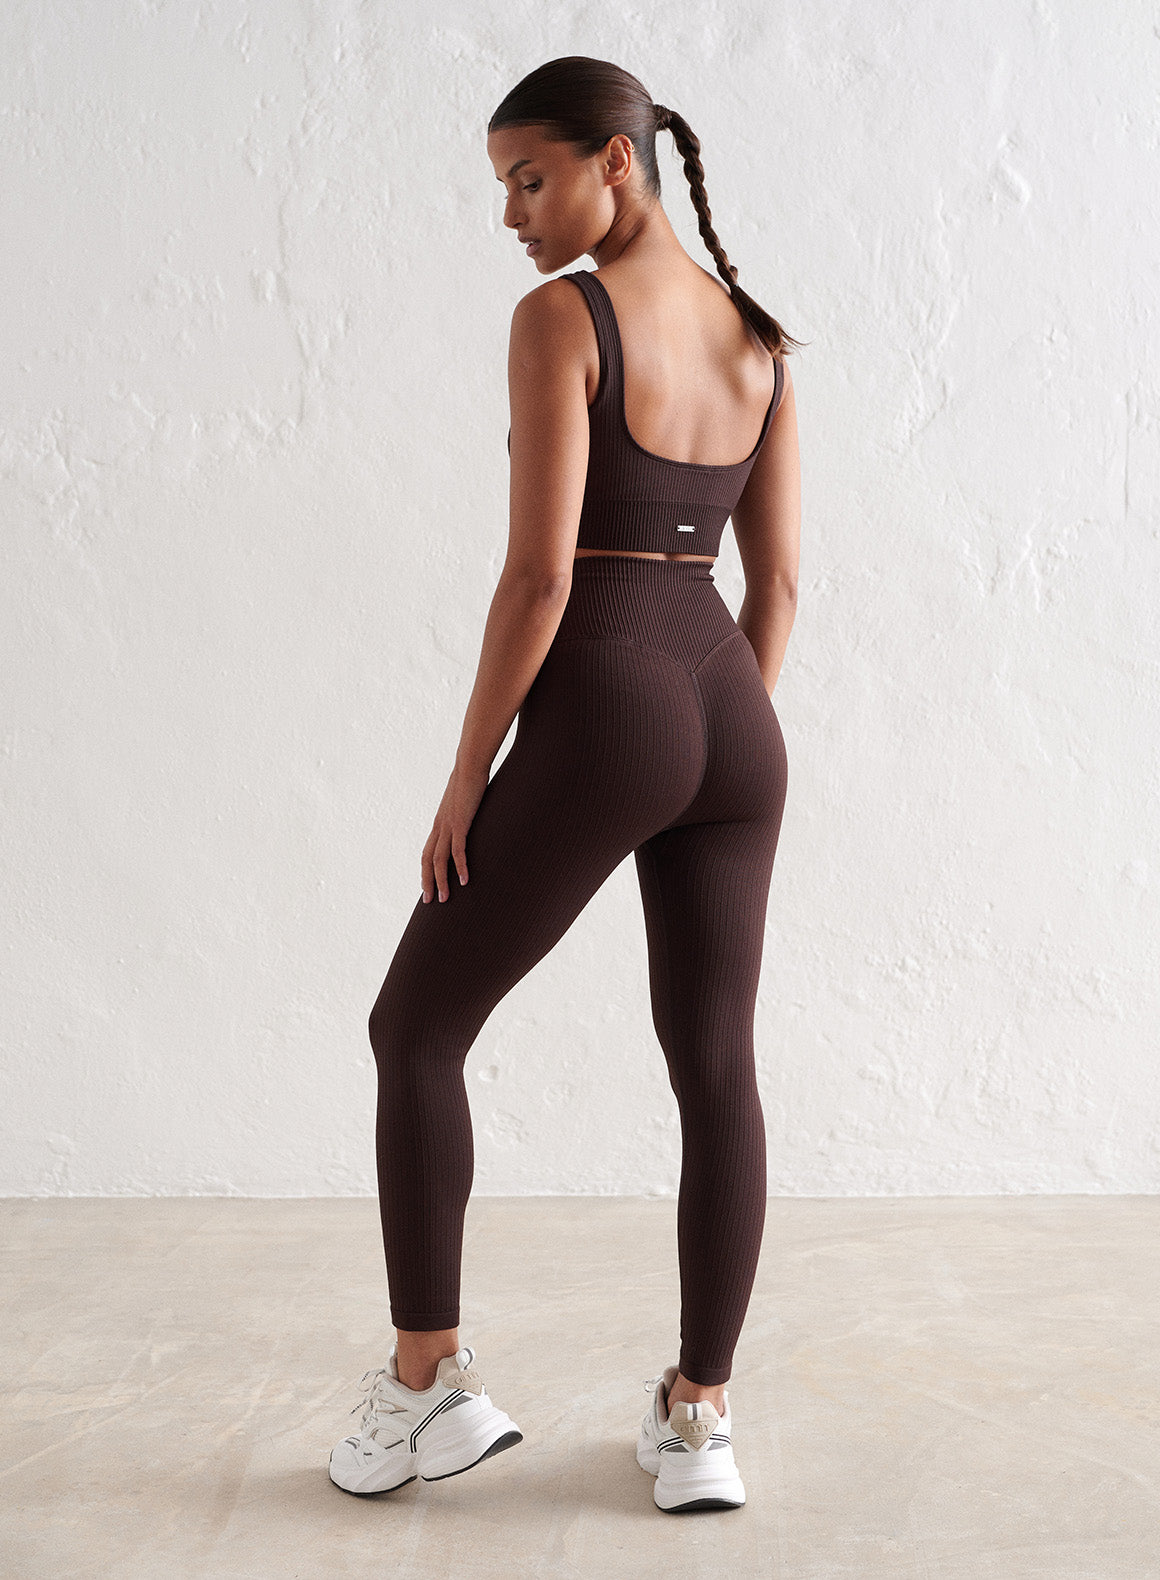 Beige Luxe Seamless Tights